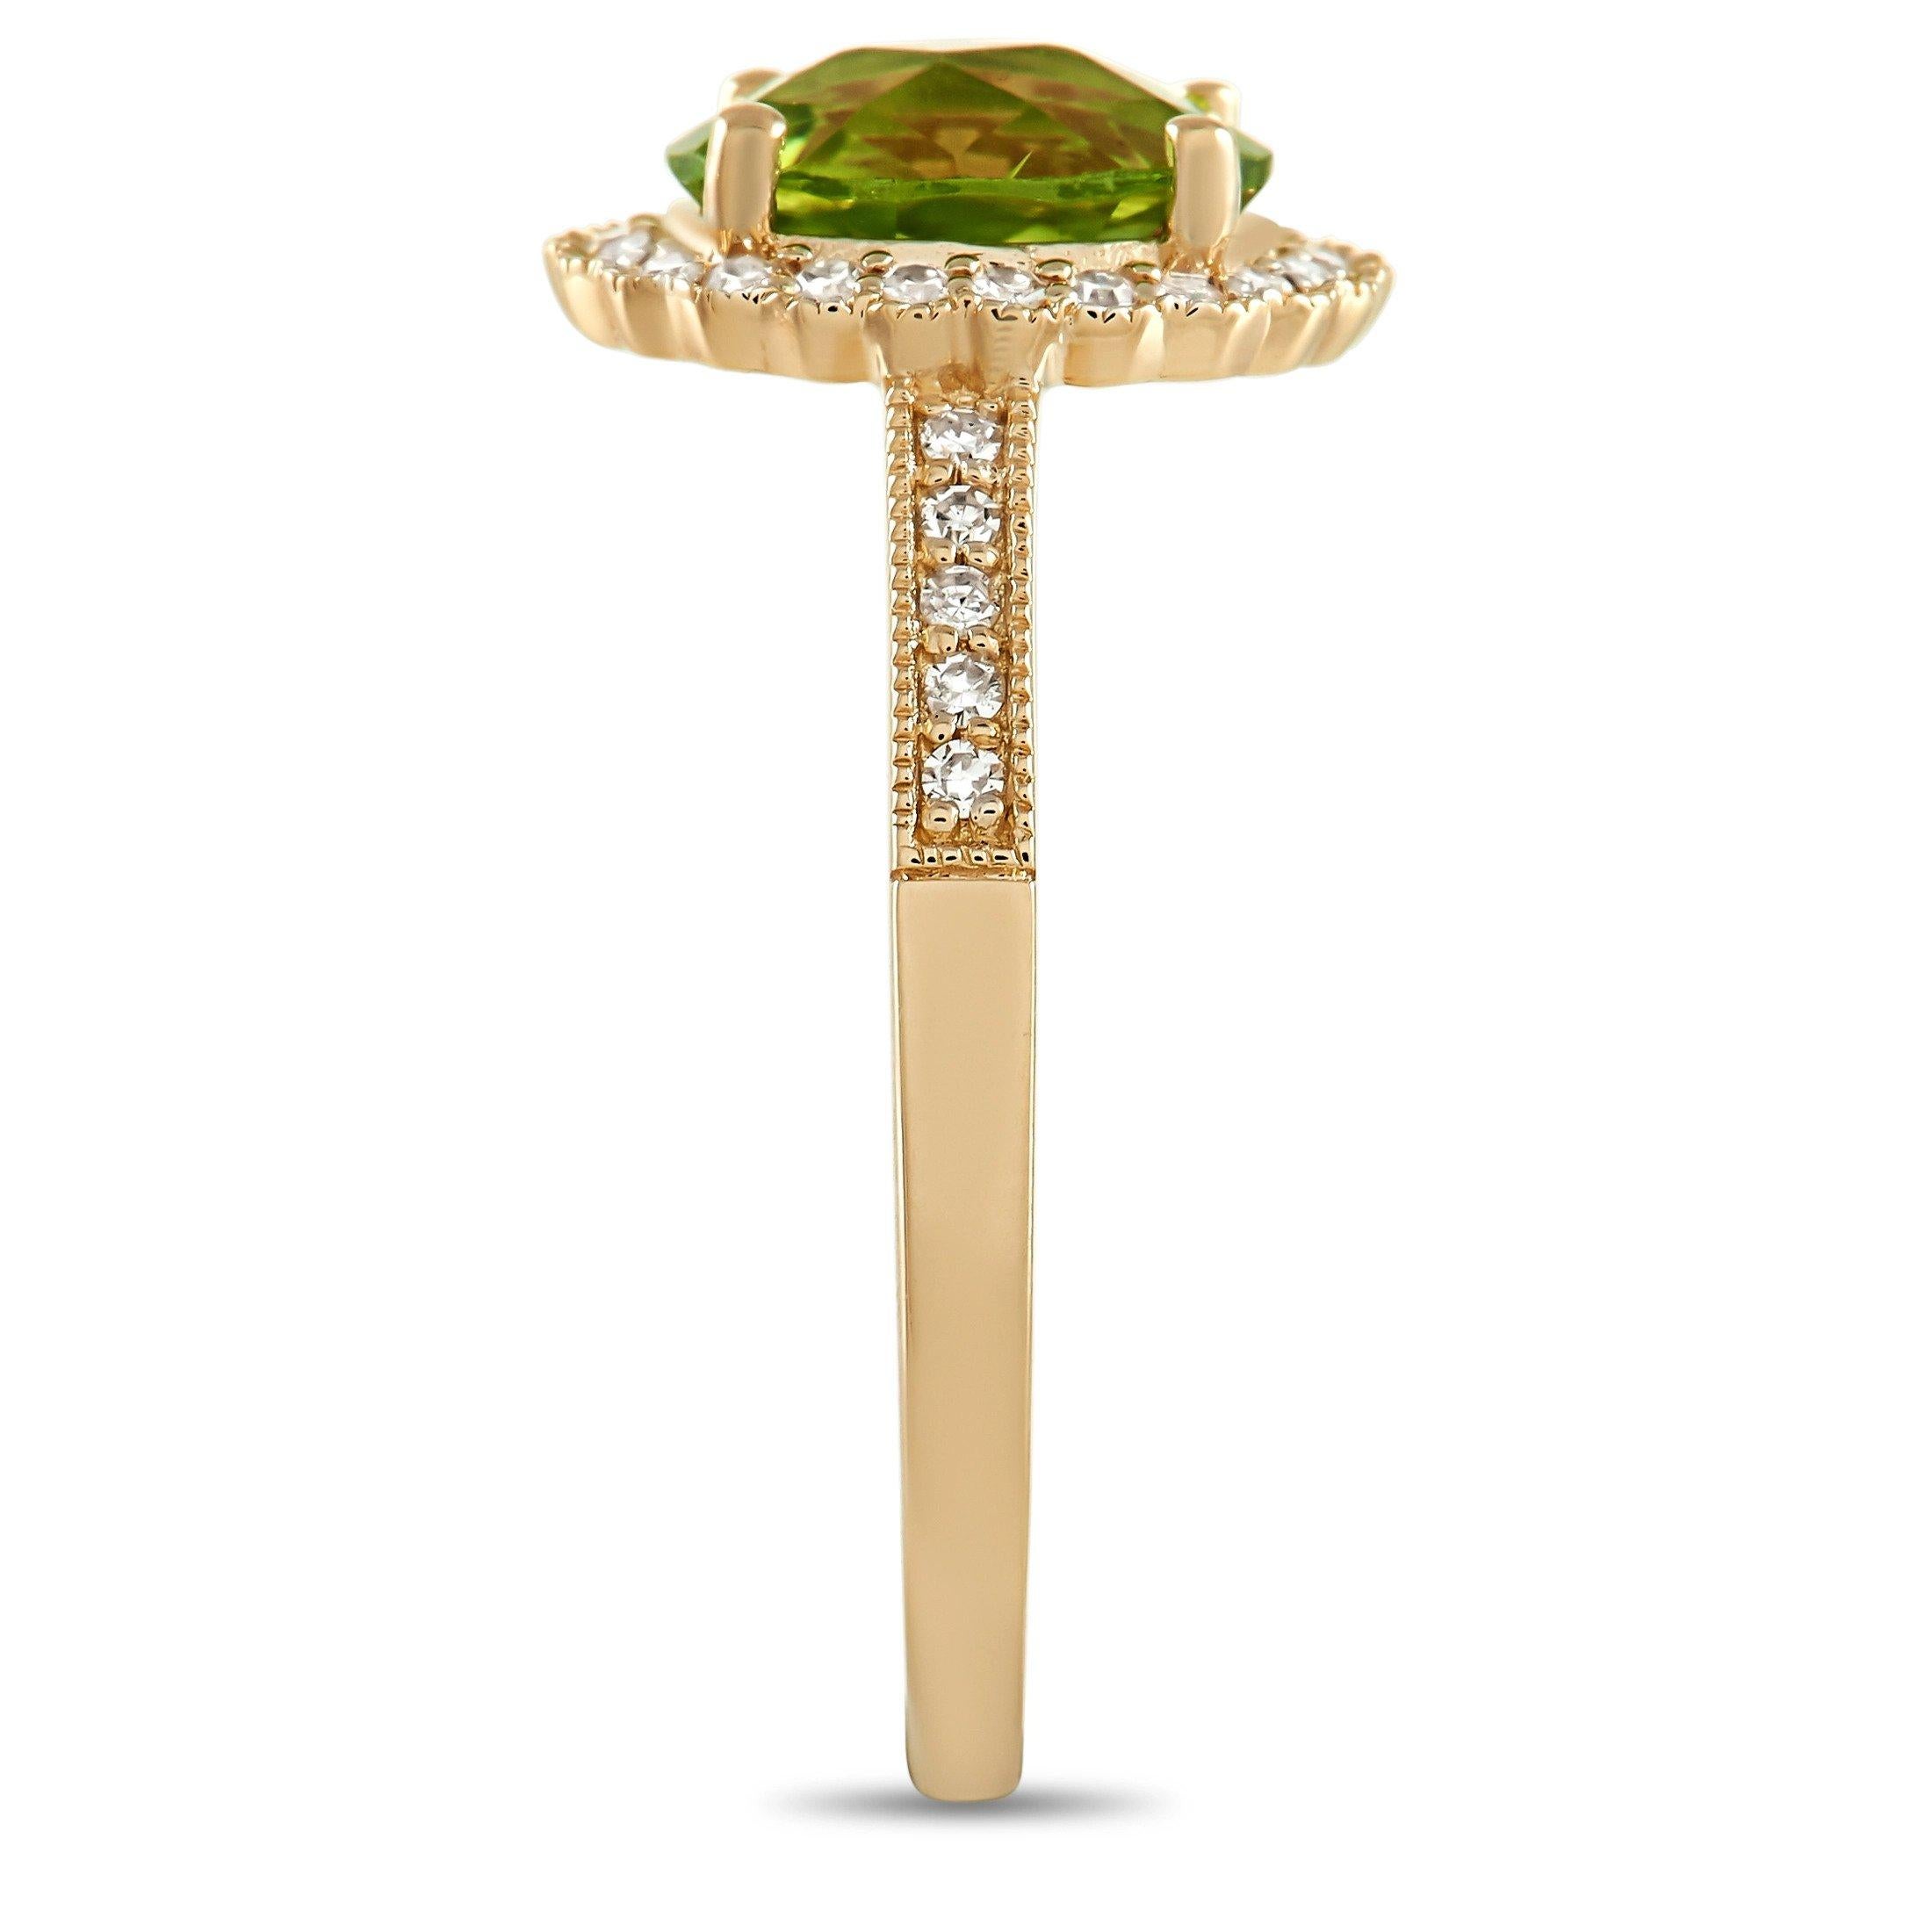 Round Cut LB Exclusive 14K Yellow Gold 0.25 ct Diamond and Peridot Ring